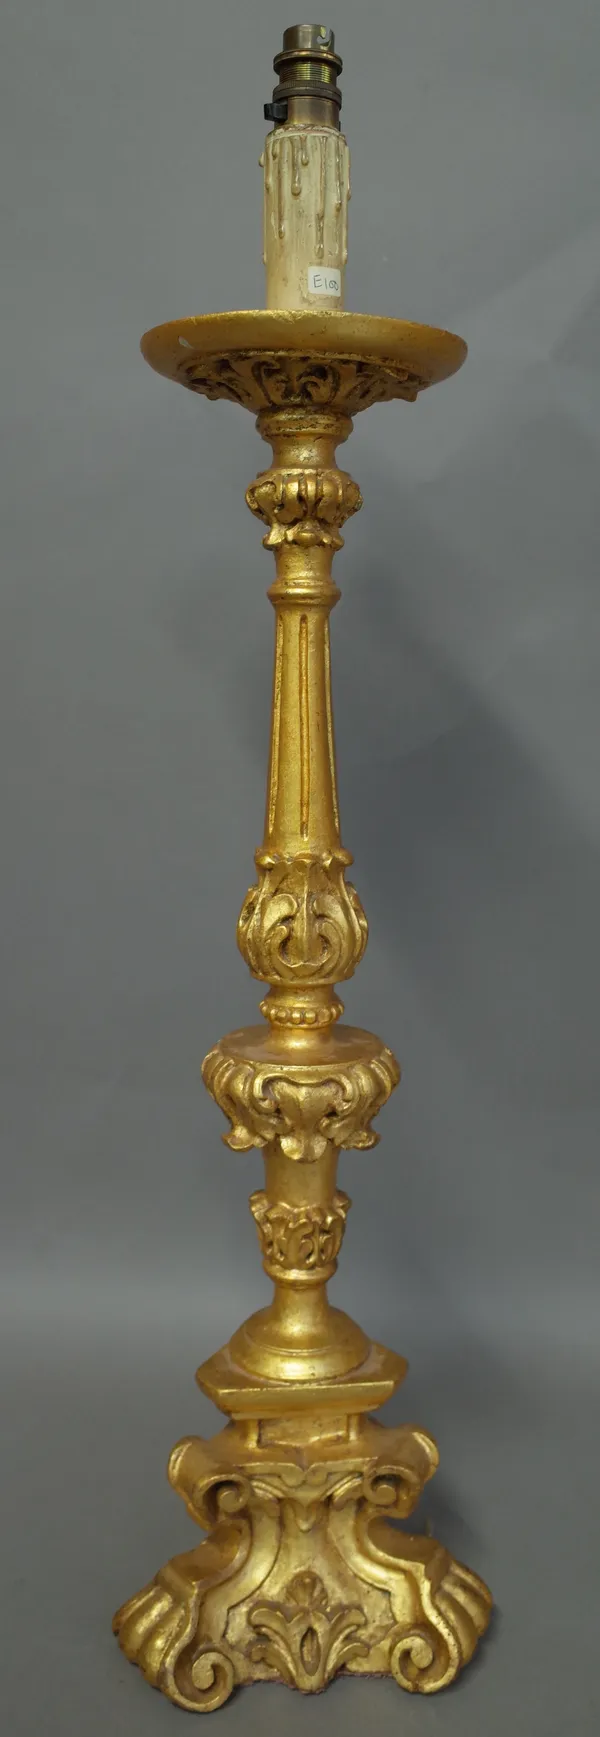 Two 17th century style giltwood altar candlesticks of fleur de lys scroll form, 20cm high and a giltwood table lamp, (converted) of similar style, 64c